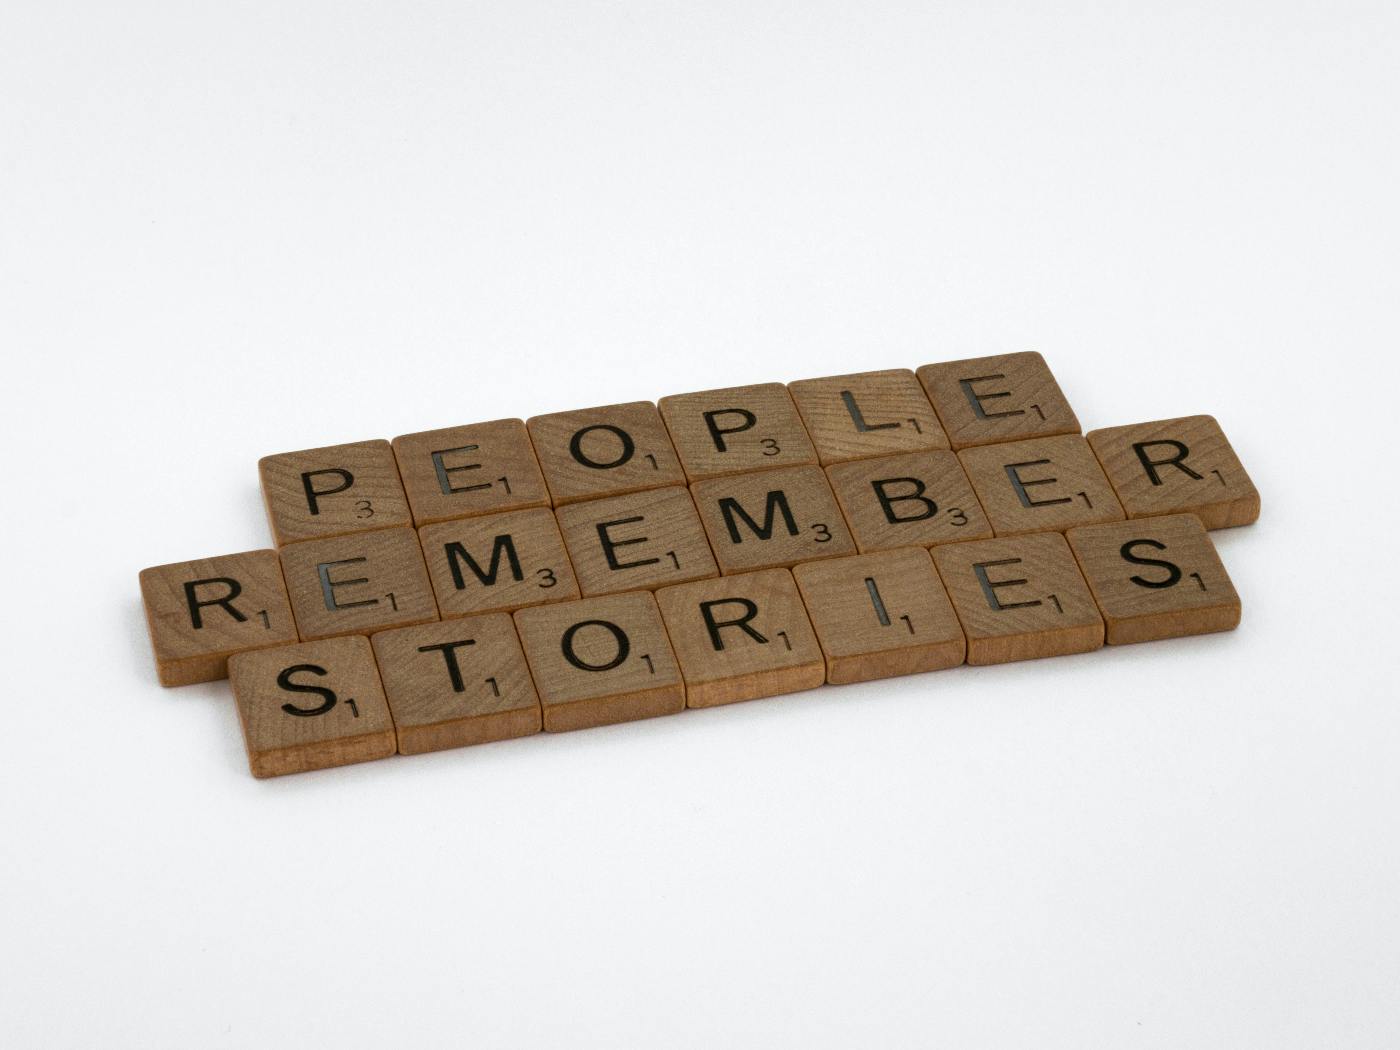 Scrabble Tiles spelling out People Remember Stories